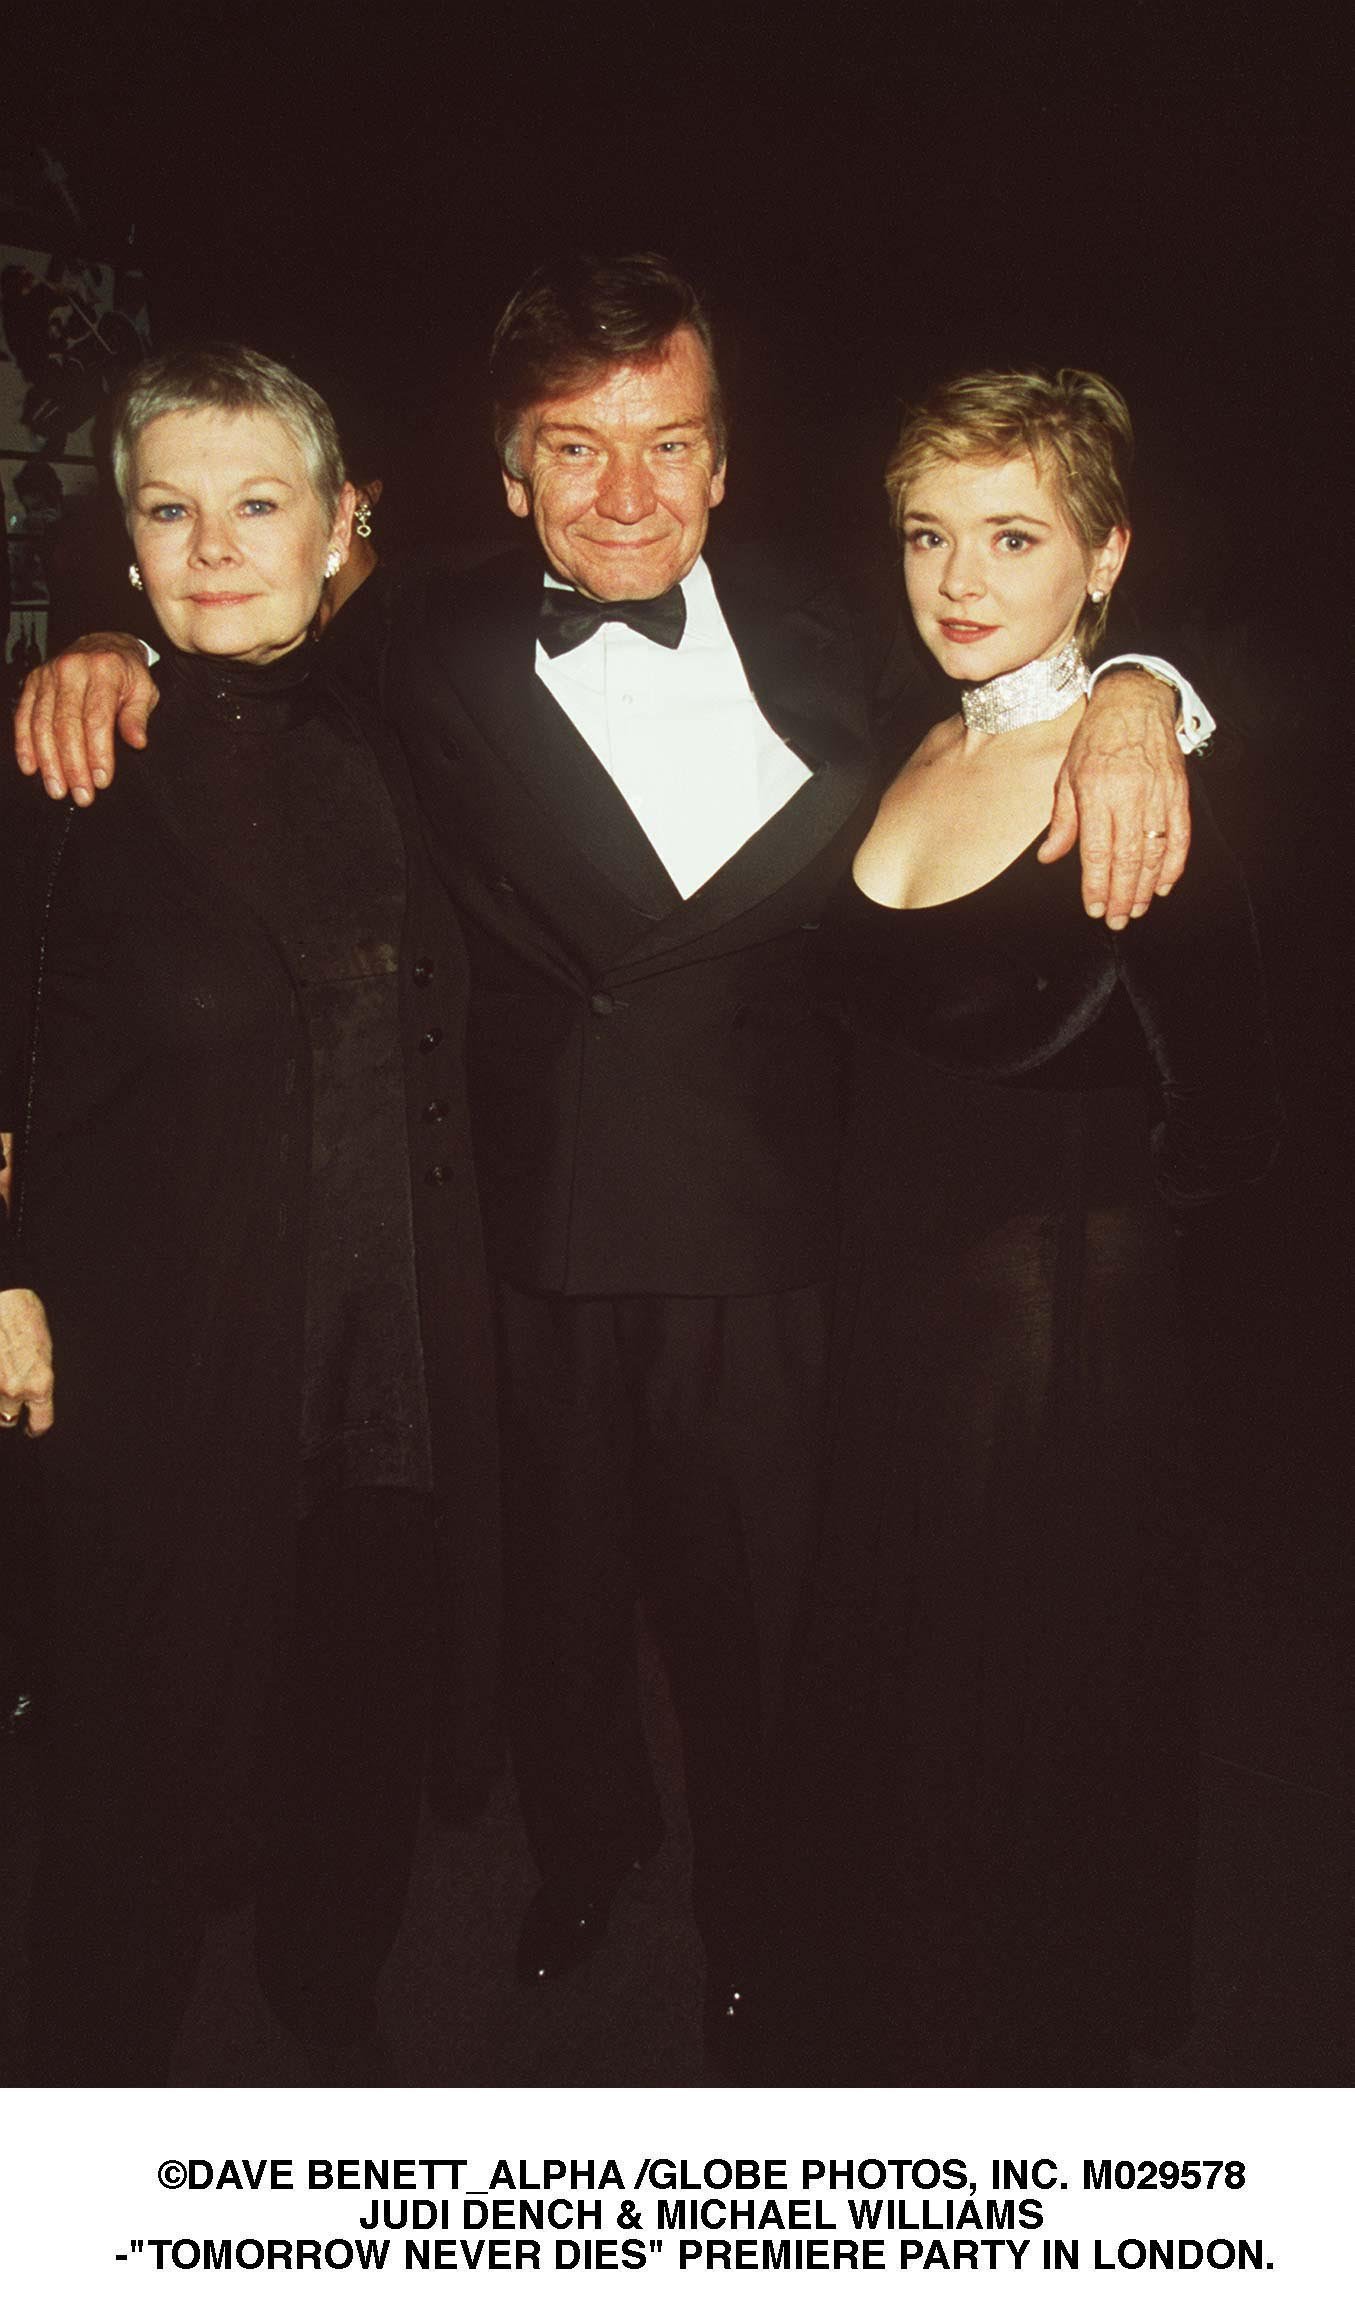 Judi Dench, Michael Williams, and their daughter Finty Williams at the world gala premiere of "Tomorrow Never Dies" on December 9, 1997, in London | Source: Getty Images